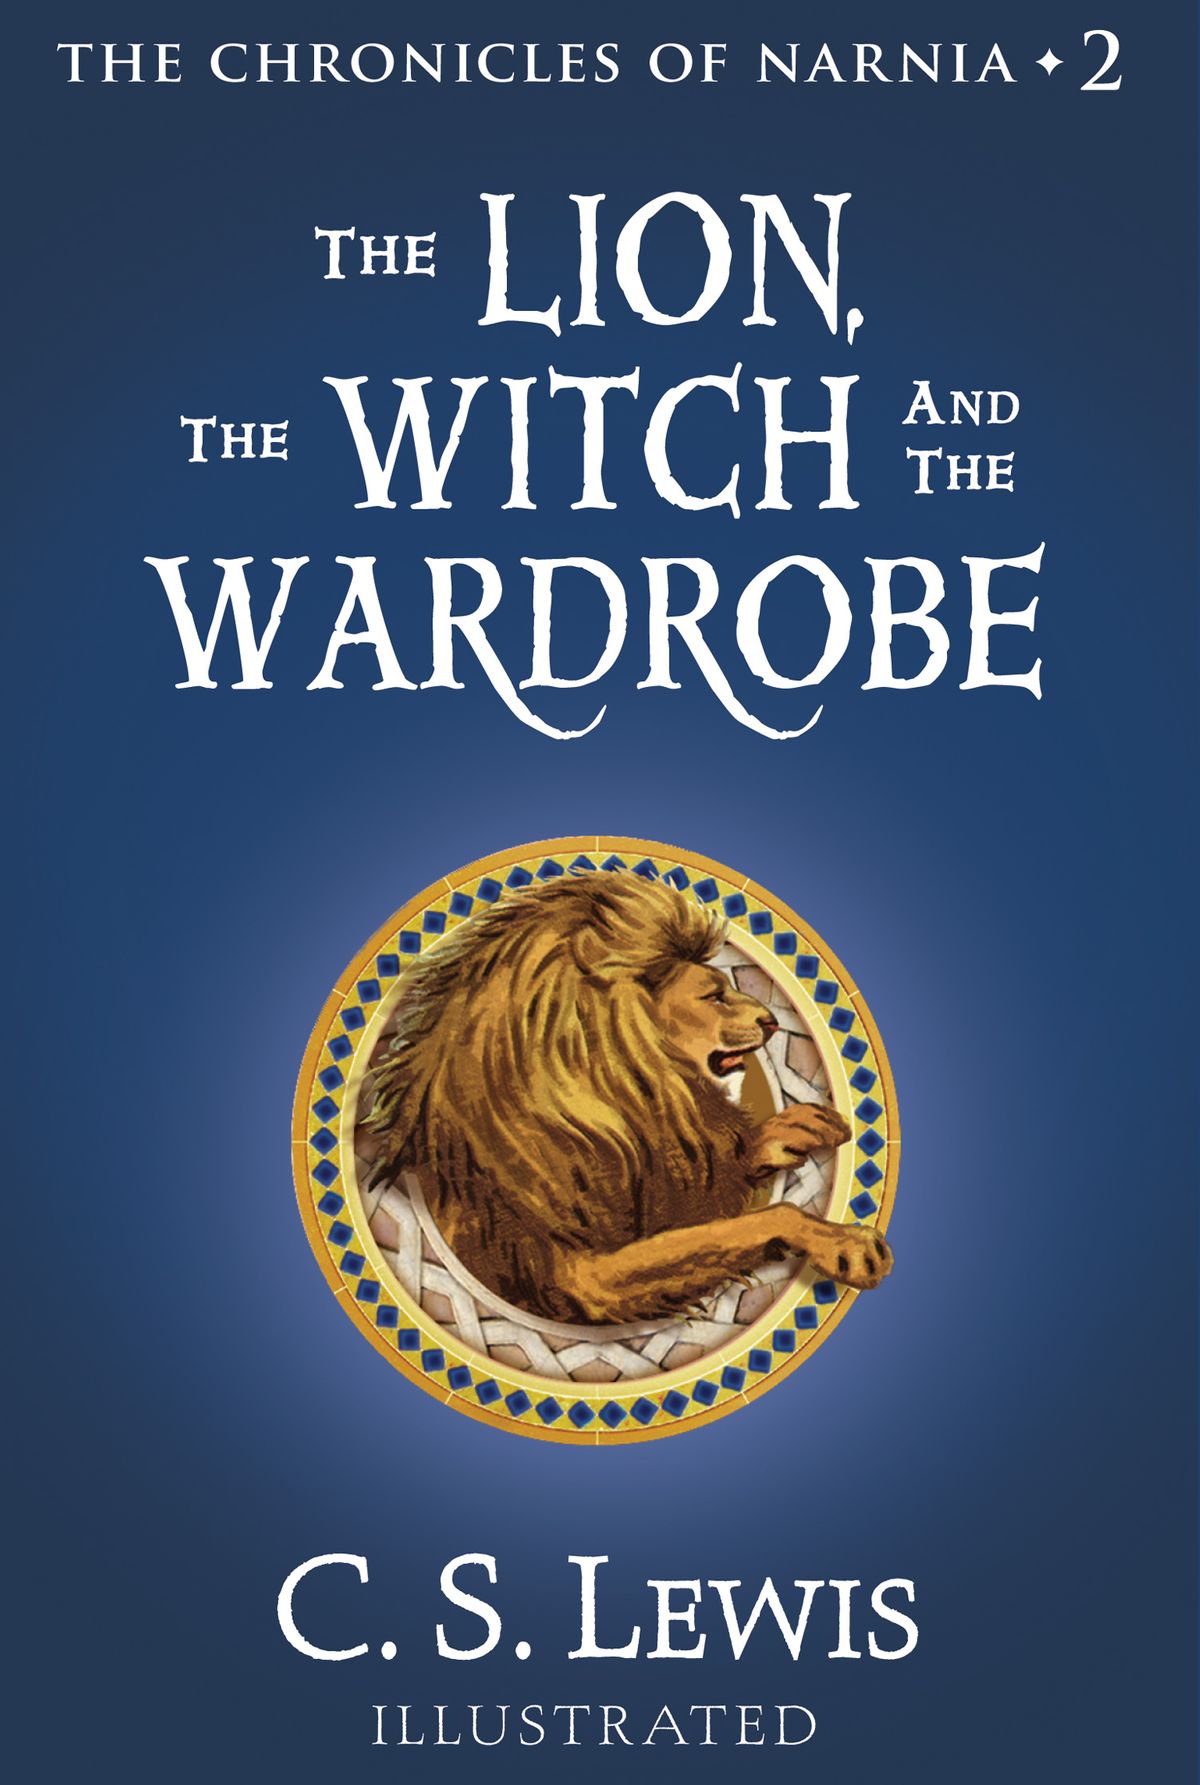 The Lion The Witch And The Wardrobe Pdf Free Knowdemia